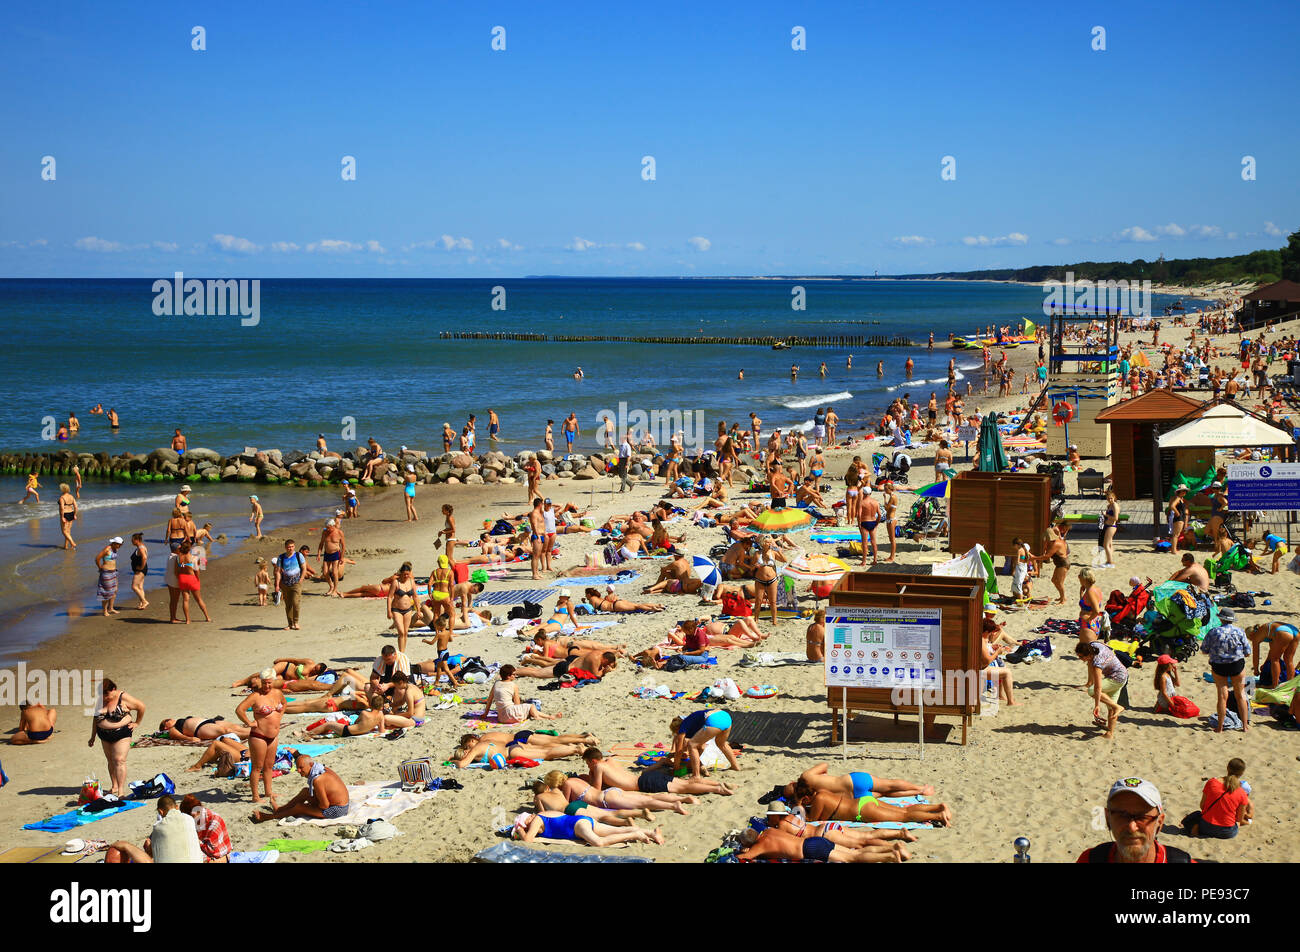 Zelenogradsk, Russia - August 17, 2017: A crowd of bathers in Zelenogradsk beach located on the Baltic Sea coast, Russia. Stock Photo